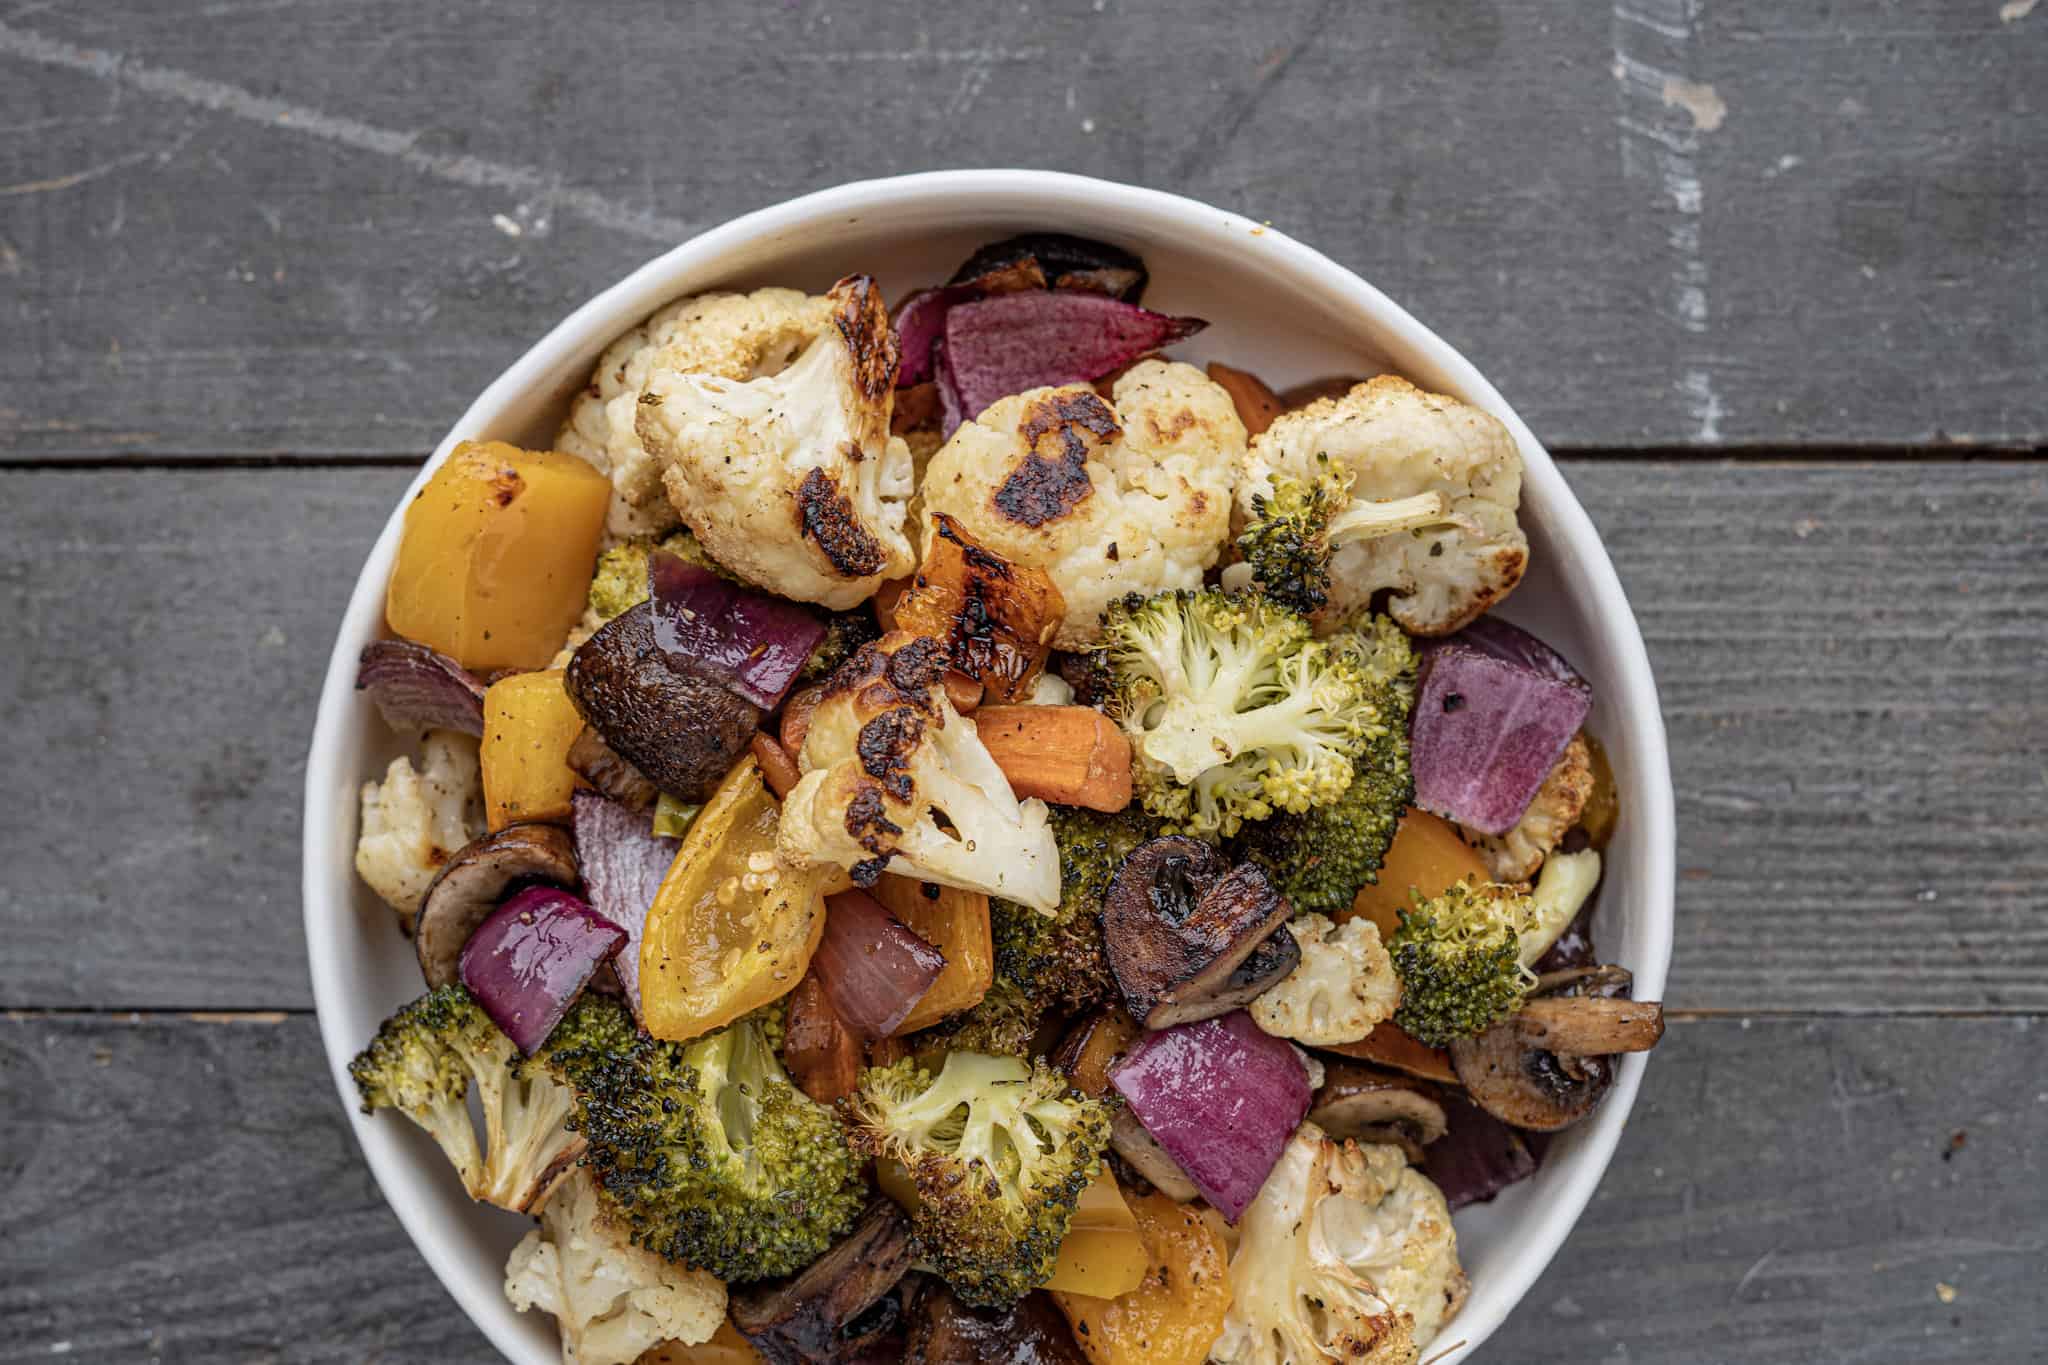 Smoked Vegetables in a Bowl